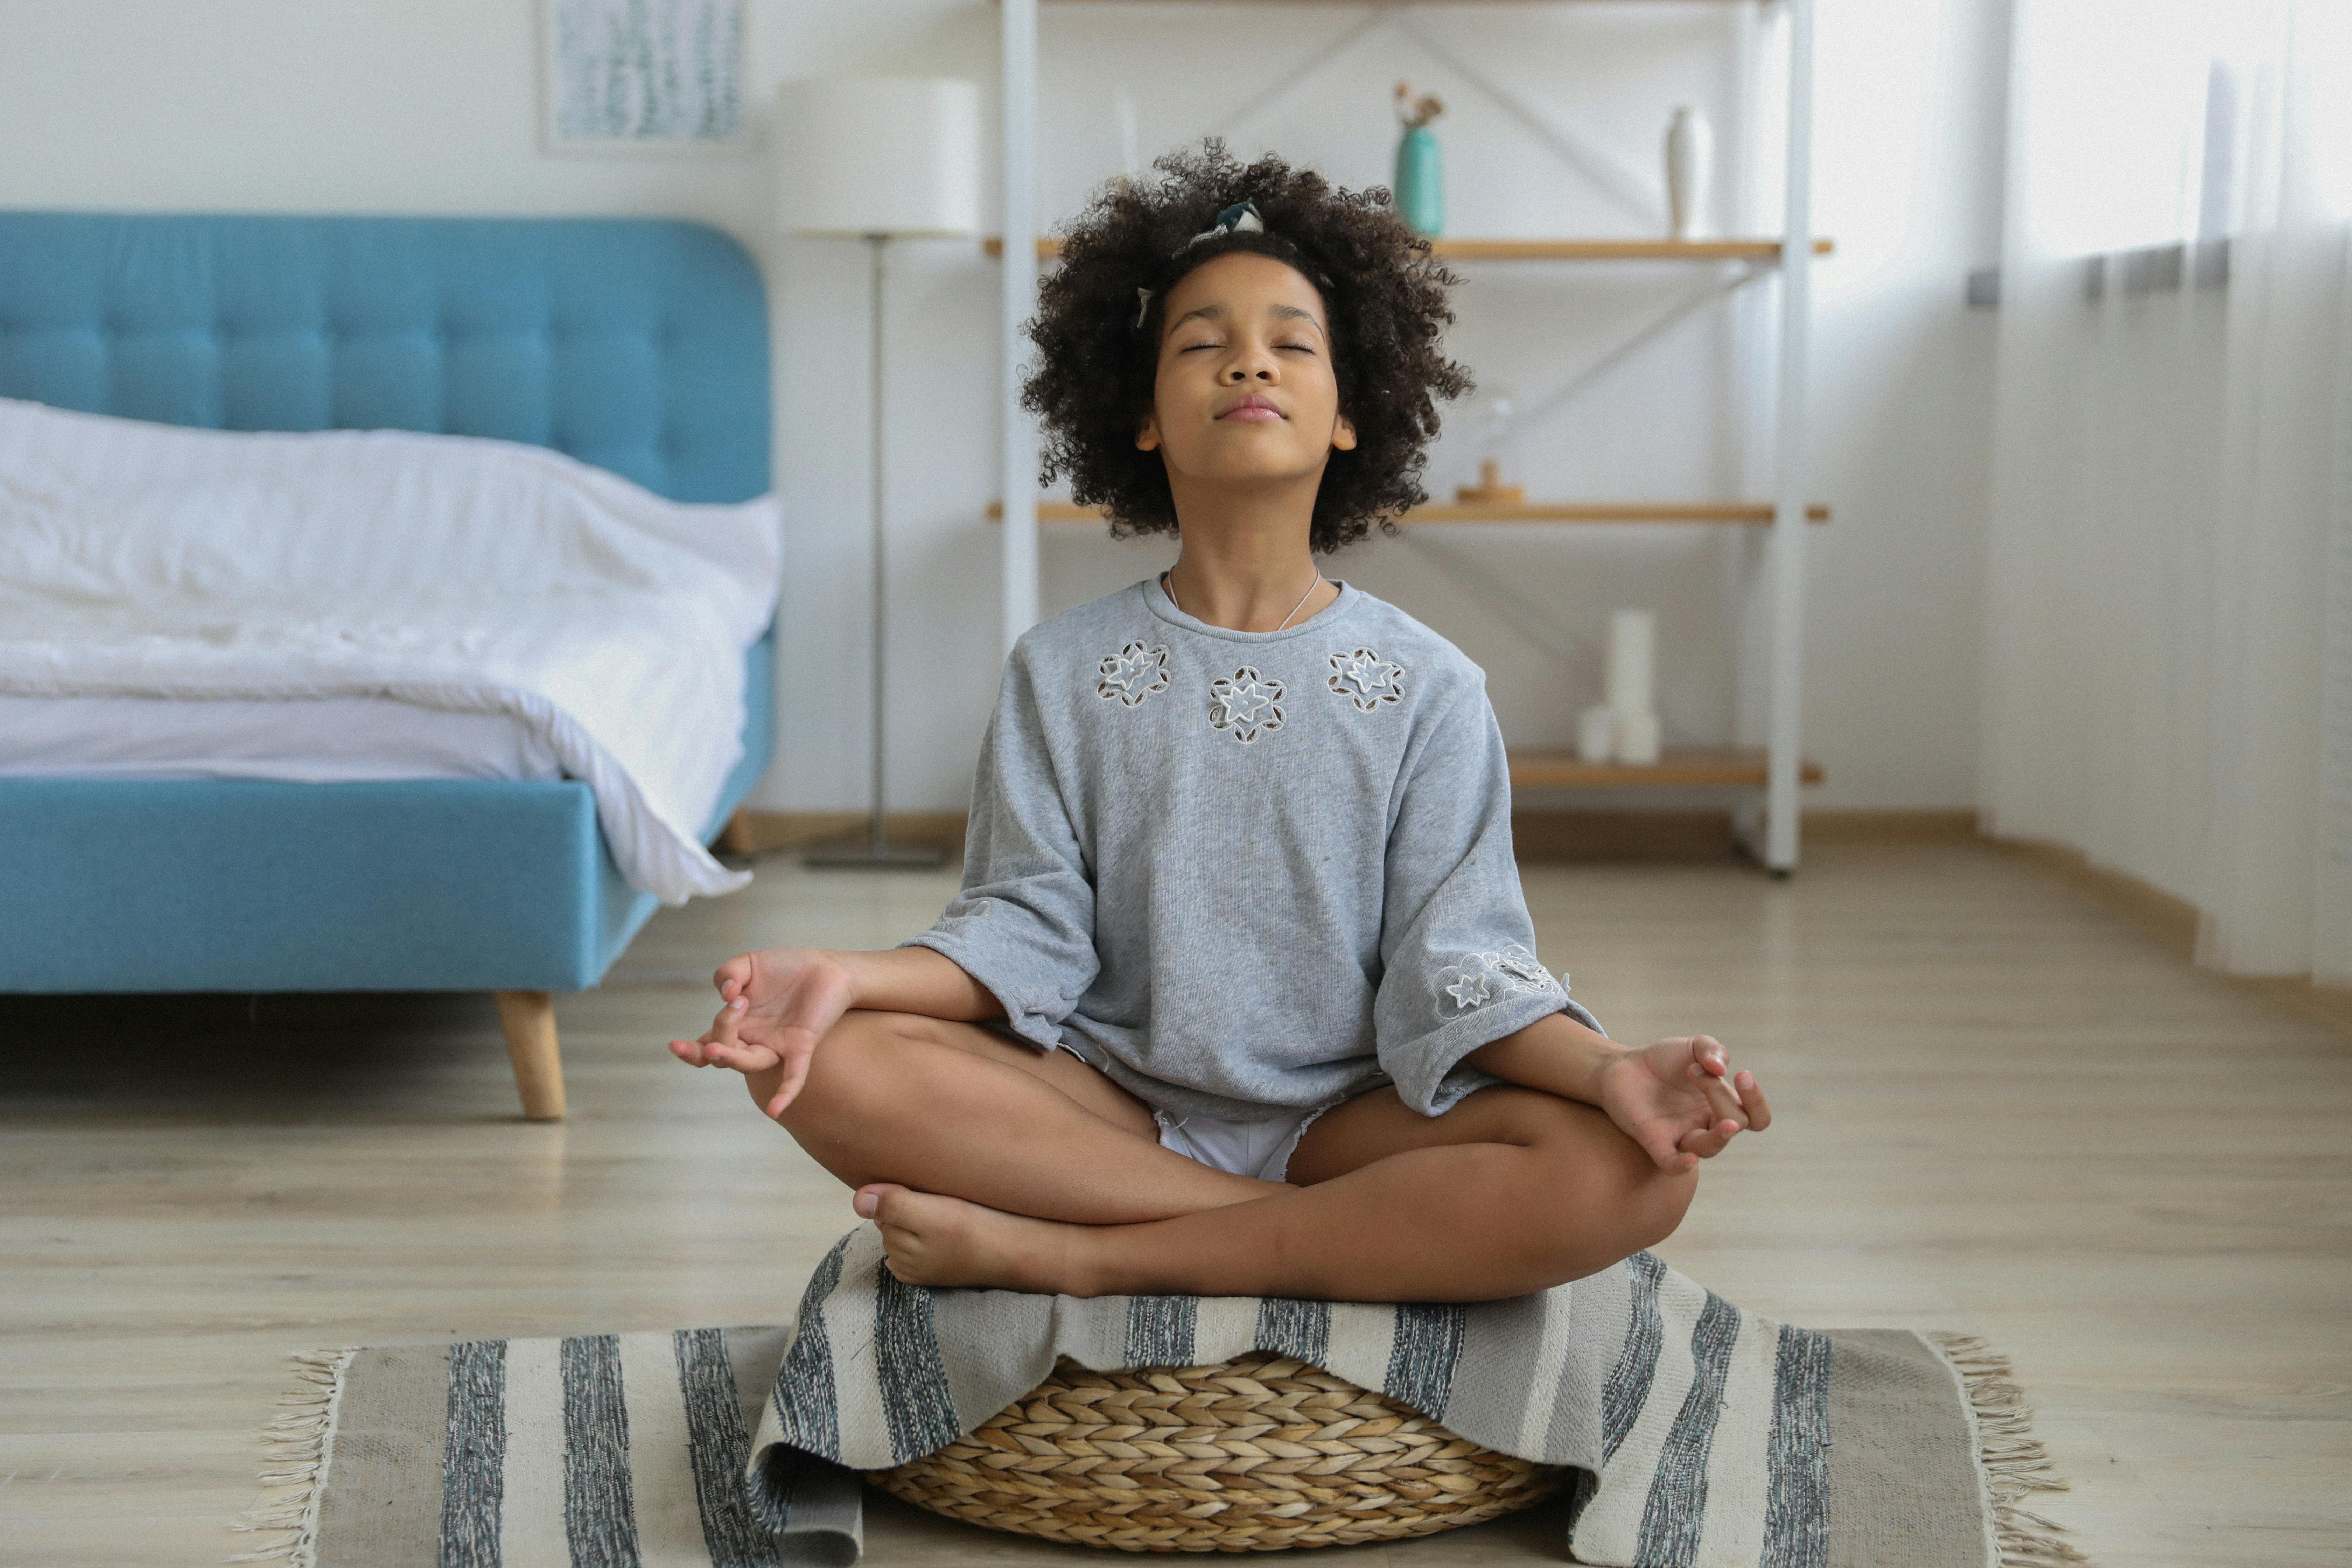 Young Minds: Introducing Mindfulness to Children